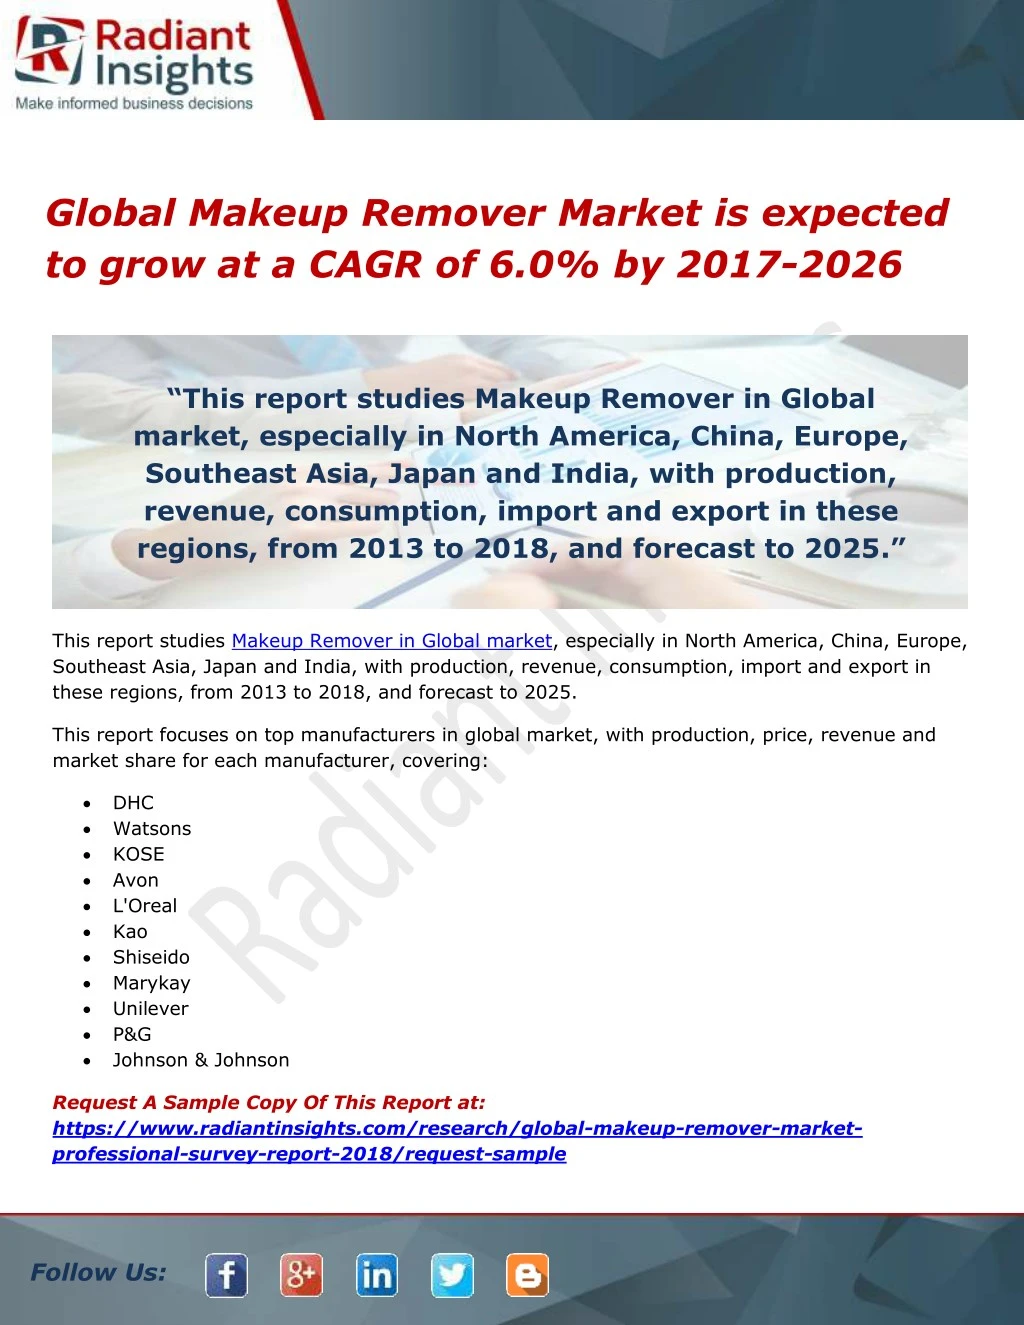 global makeup remover market is expected to grow